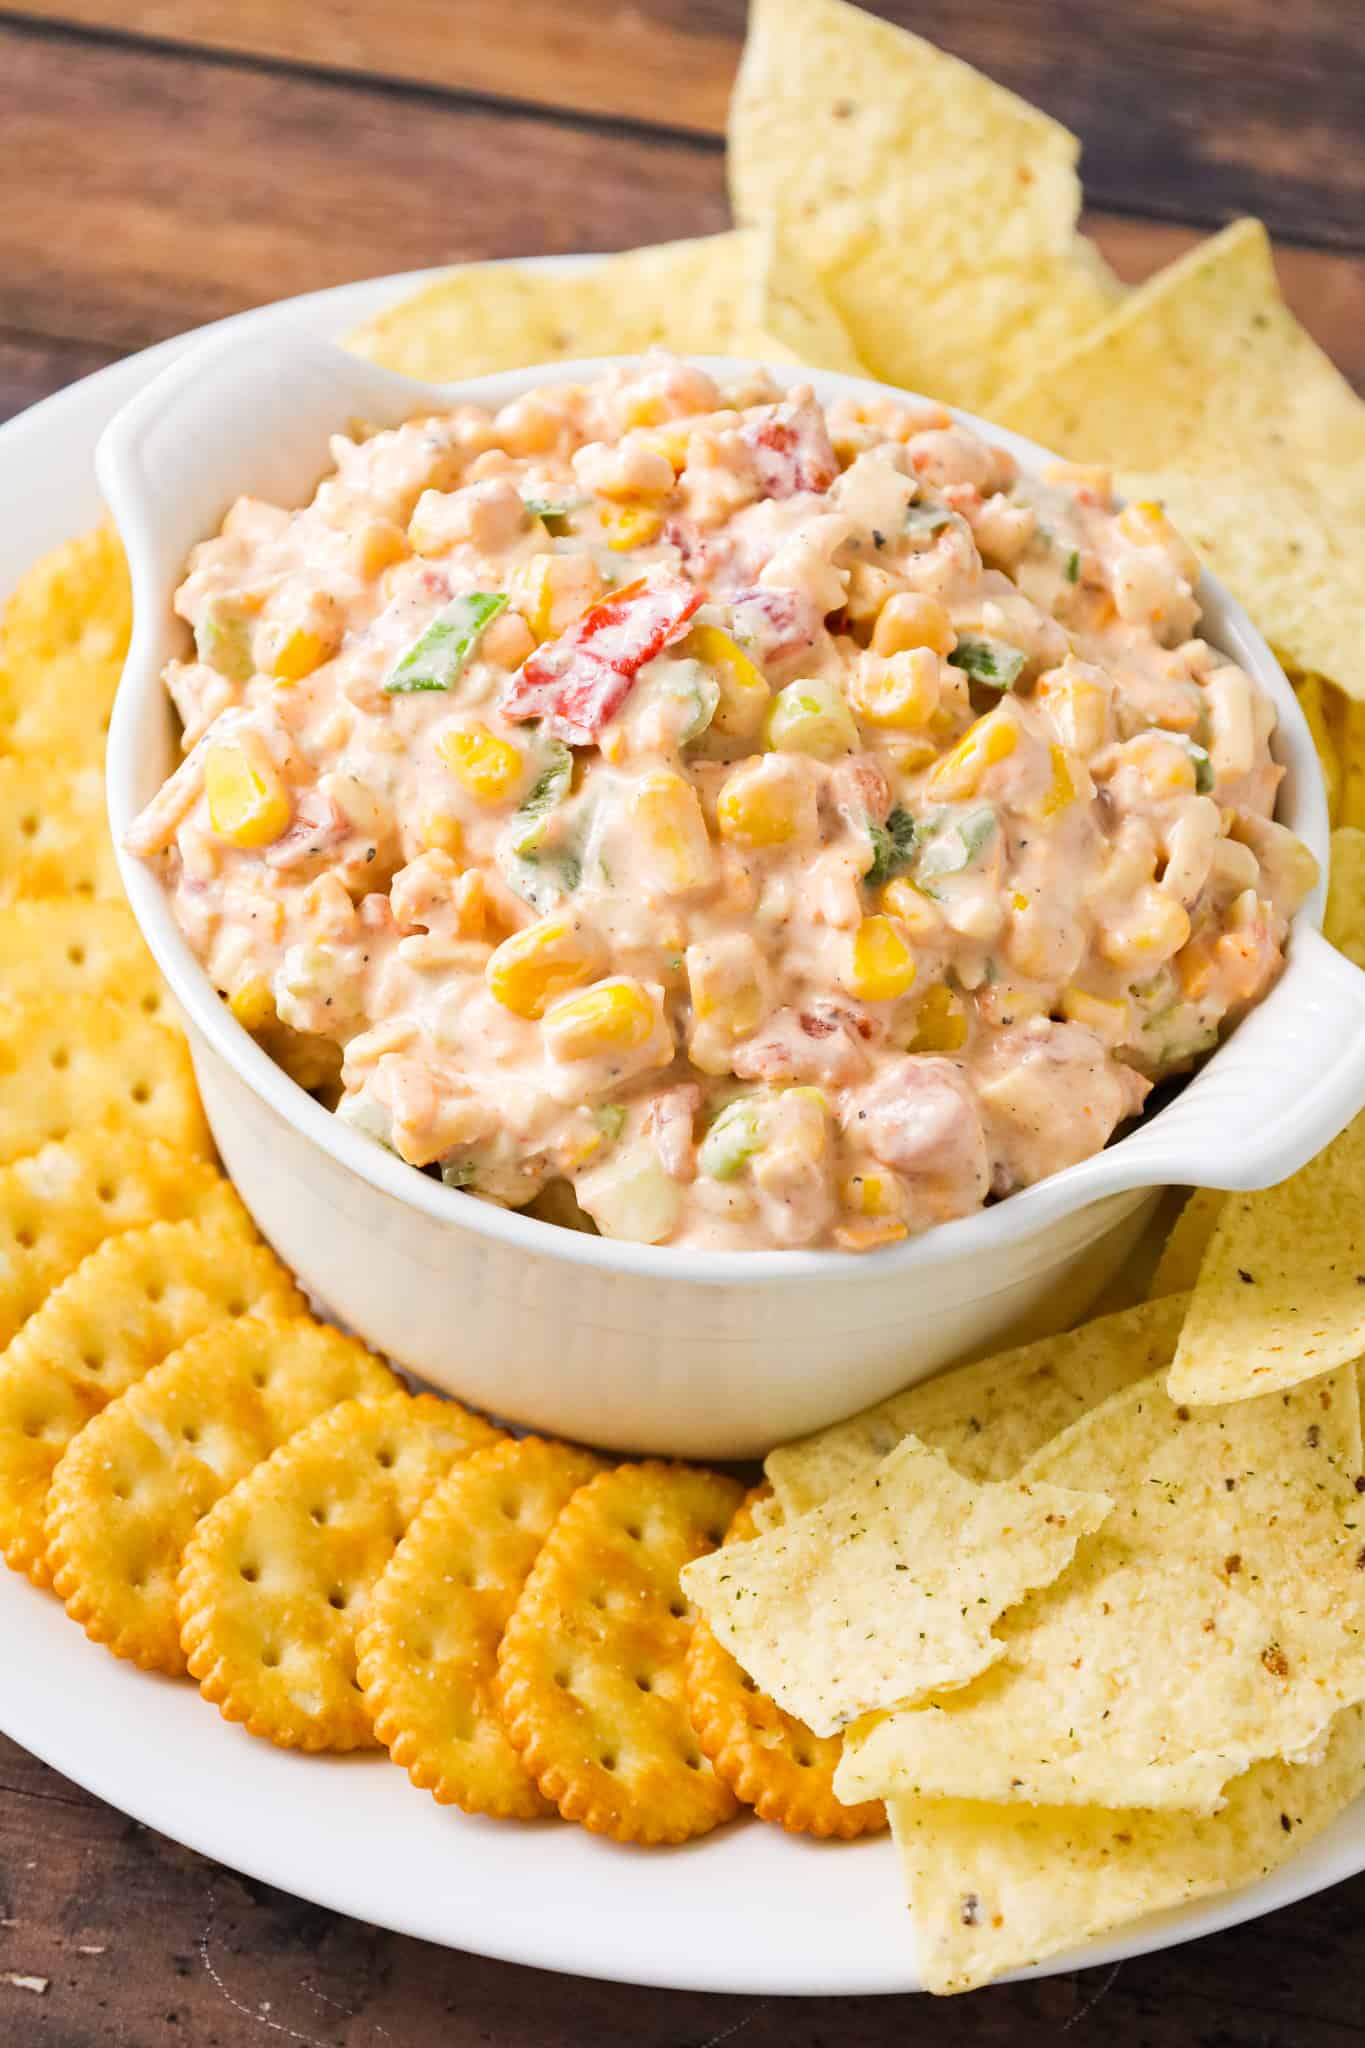 Corn Dip with Cream Cheese is a tasty cold dip recipe made with canned corn, cream cheese, sour cream, Rotel, shredded cheese and chopped green onions.